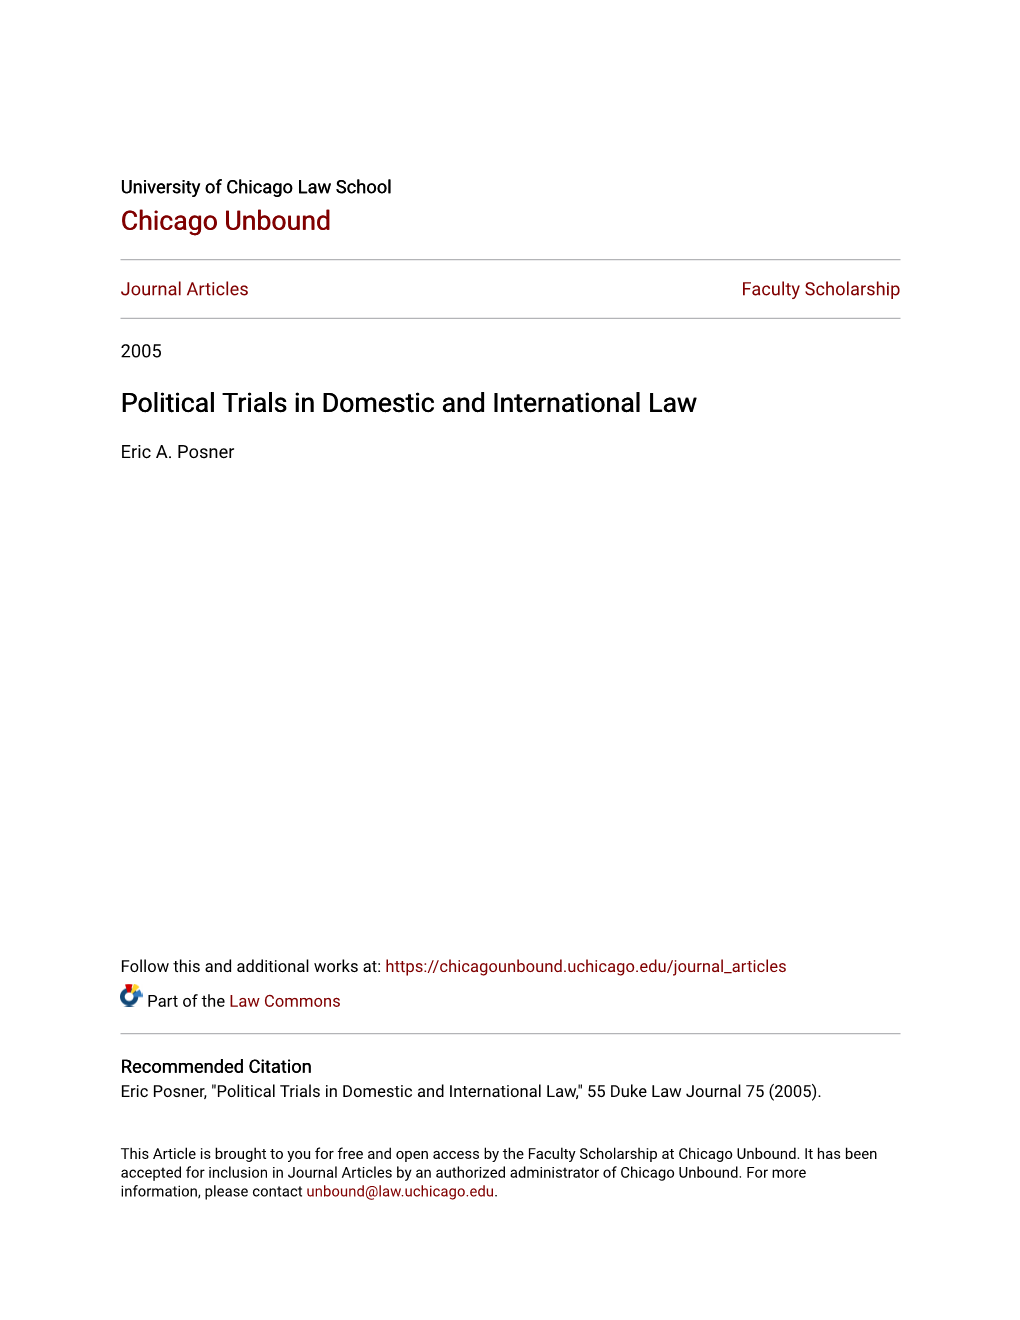 Political Trials in Domestic and International Law